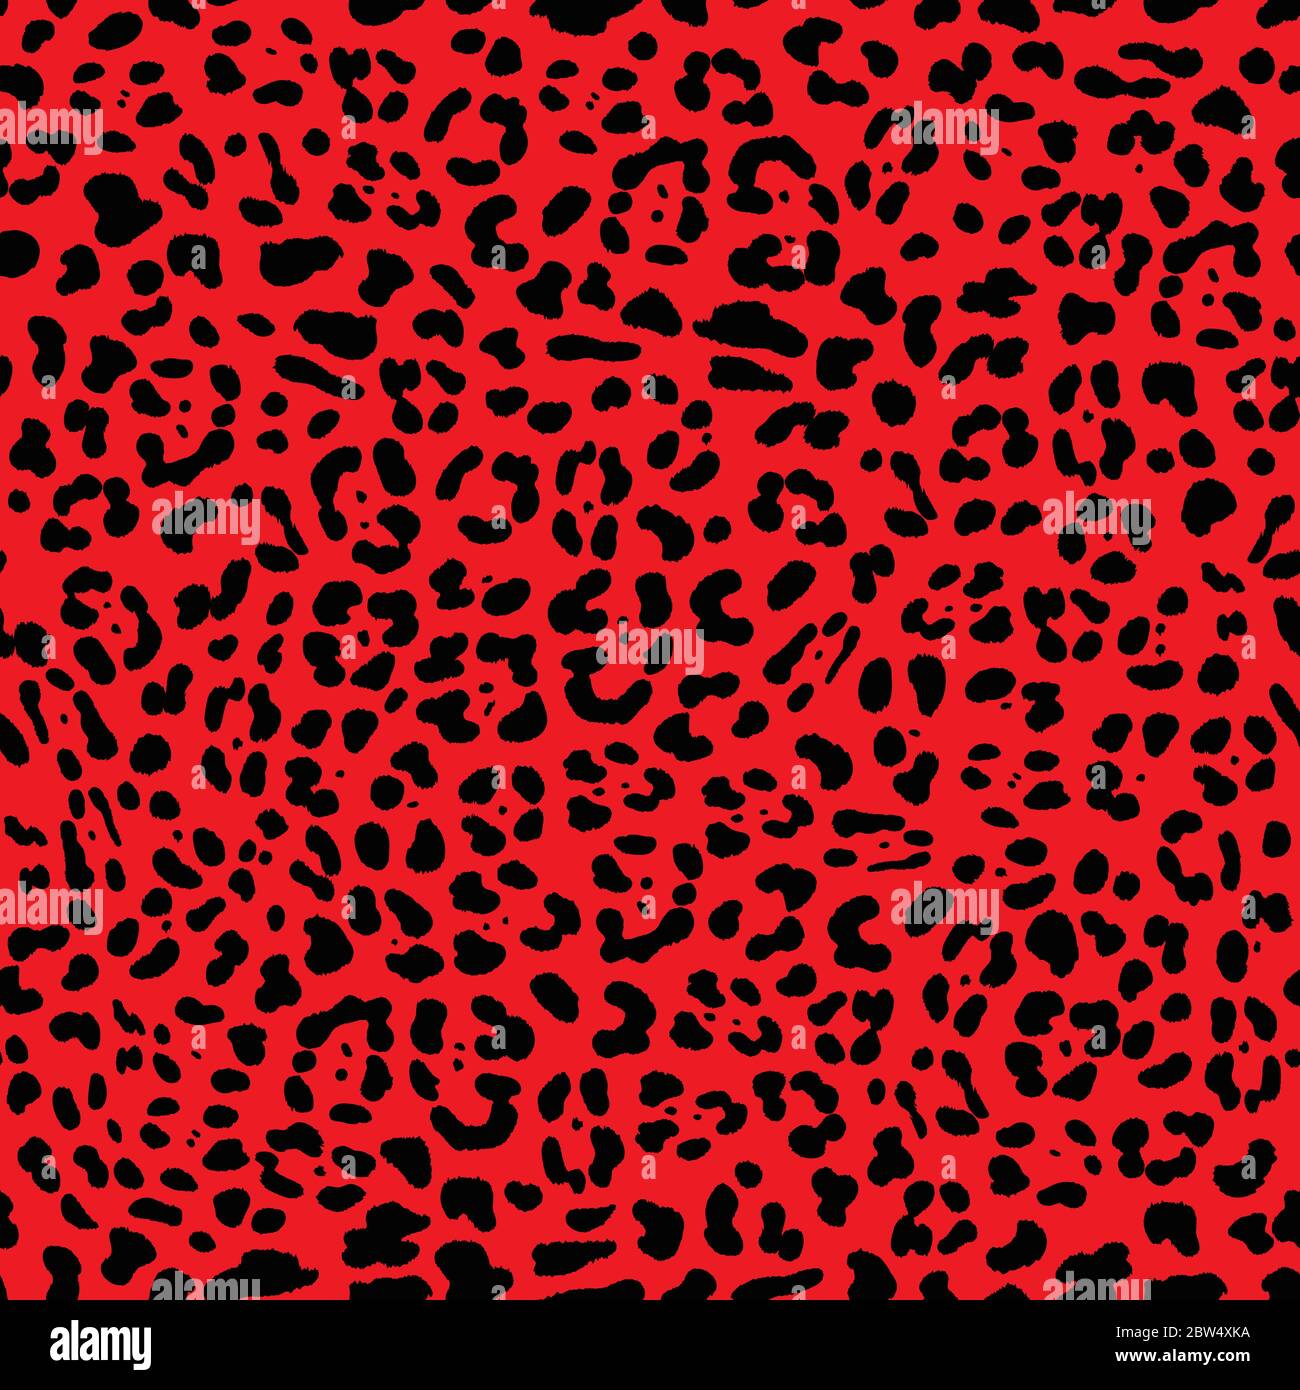 Punk rock 80s style fashion pattern. Seamless Faux Textured Jaguar/Leopard print seamless pattern with black spots on bright red background. Stock Vector